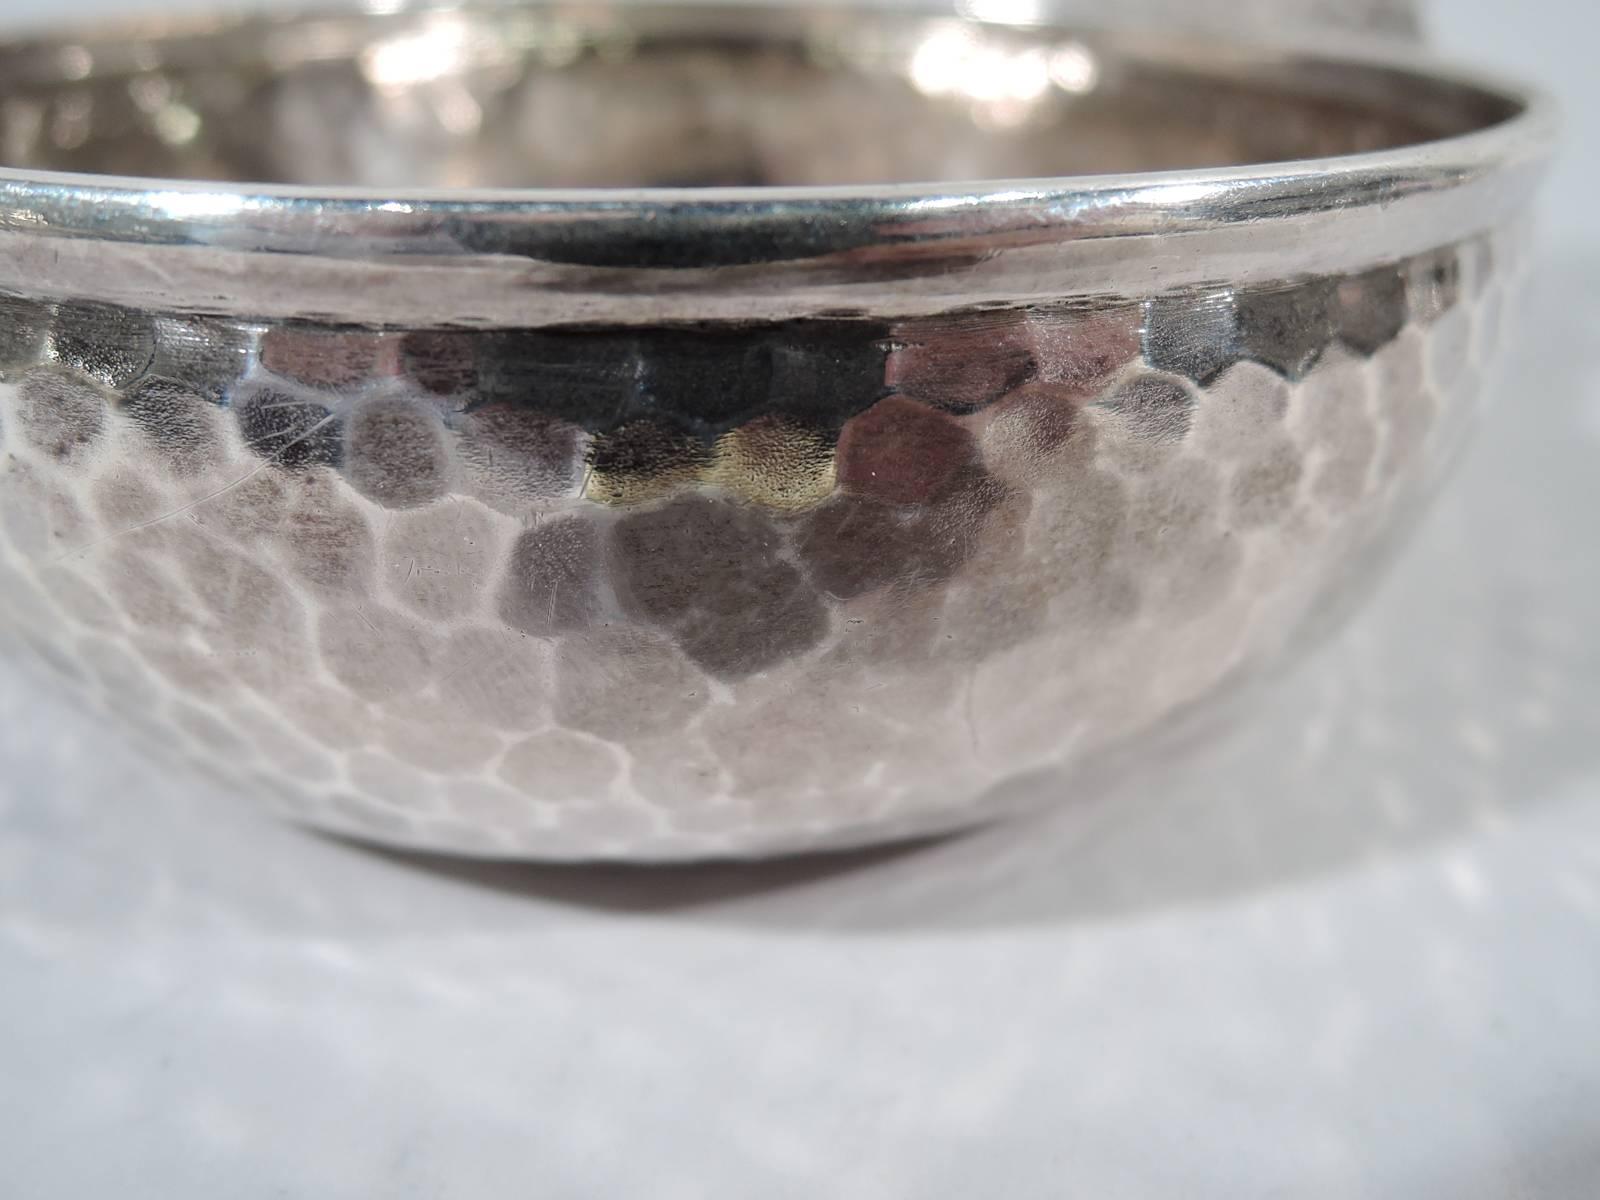 Craftsman sterling silver porringer. Made by Tiffany & Co. in New York, circa 1878. Traditional form with shaped open handle. Dense all-over fish-scale hammering. Very much a statement design. Hallmark includes pattern no. 5050 (first produced in